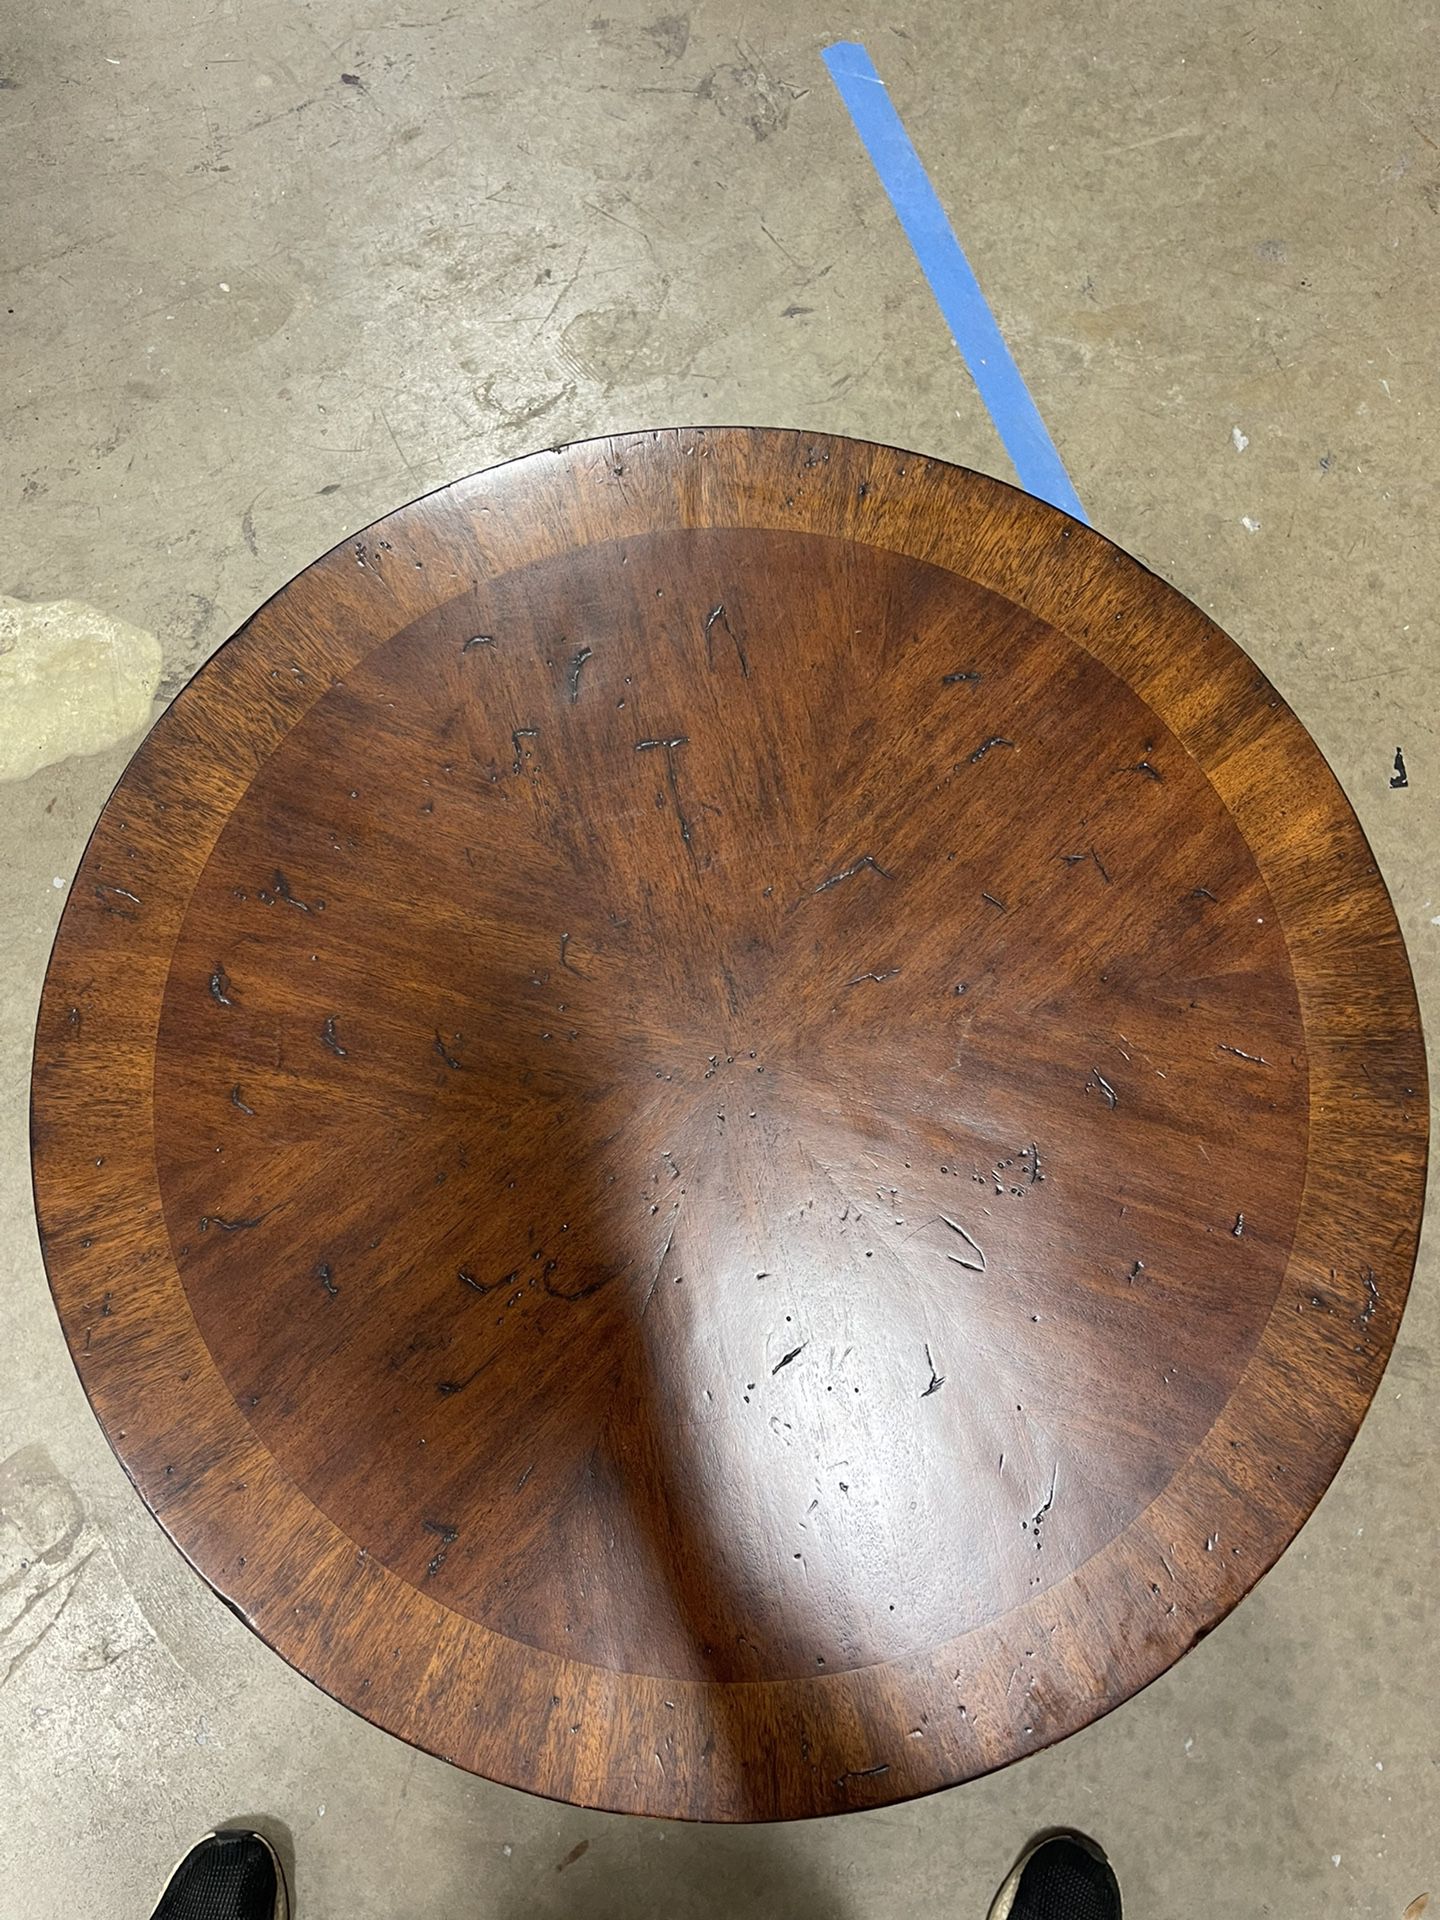 Pair Of Matching End Tables